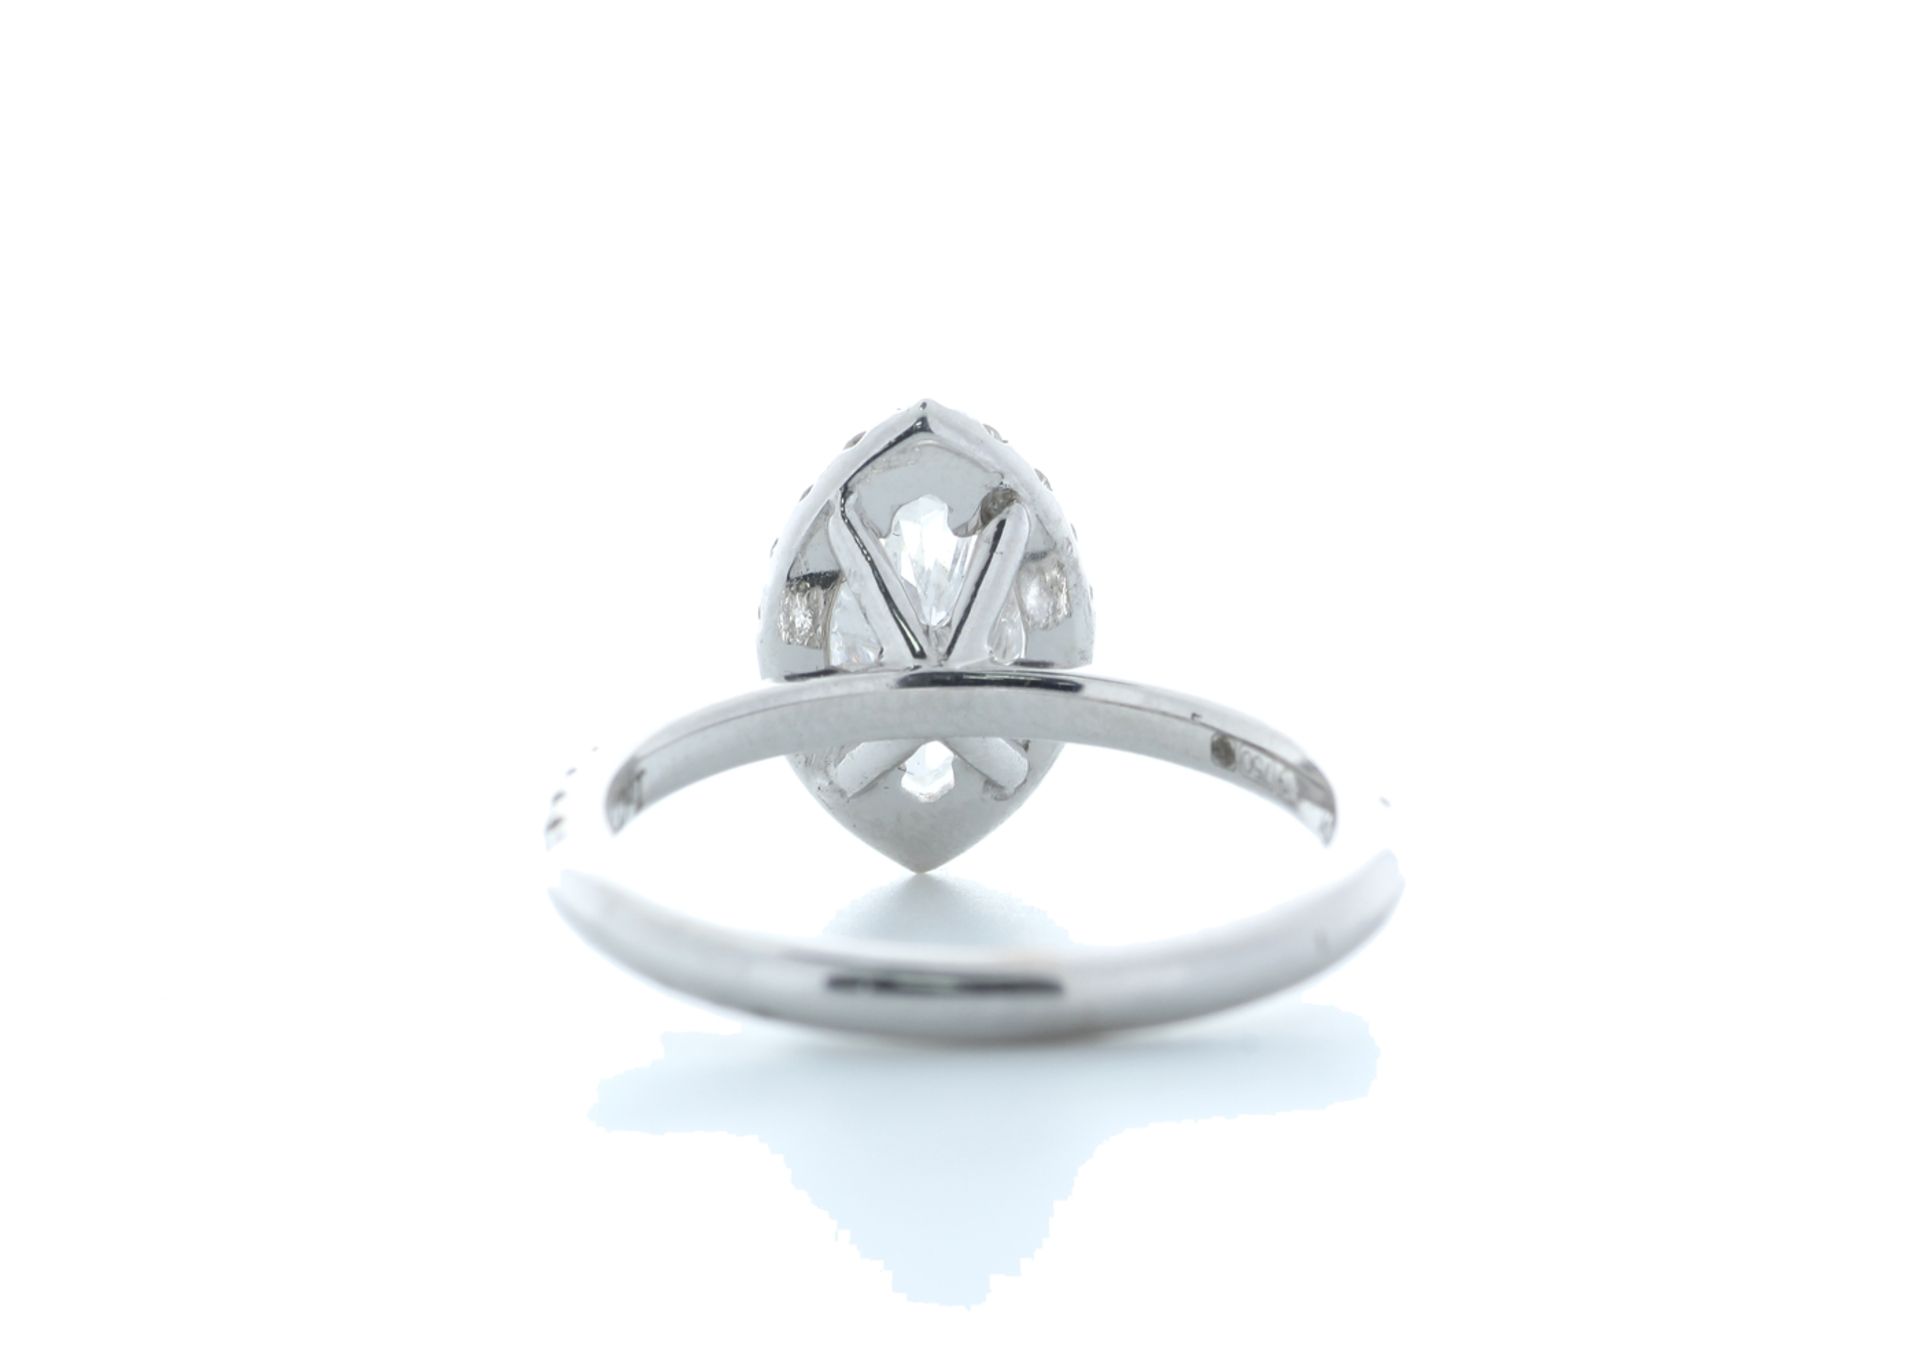 18ct White Gold Marquise Diamond With Halo Setting Ring 1.51 (1.02) Carats - Valued by IDI £13,000. - Image 3 of 5